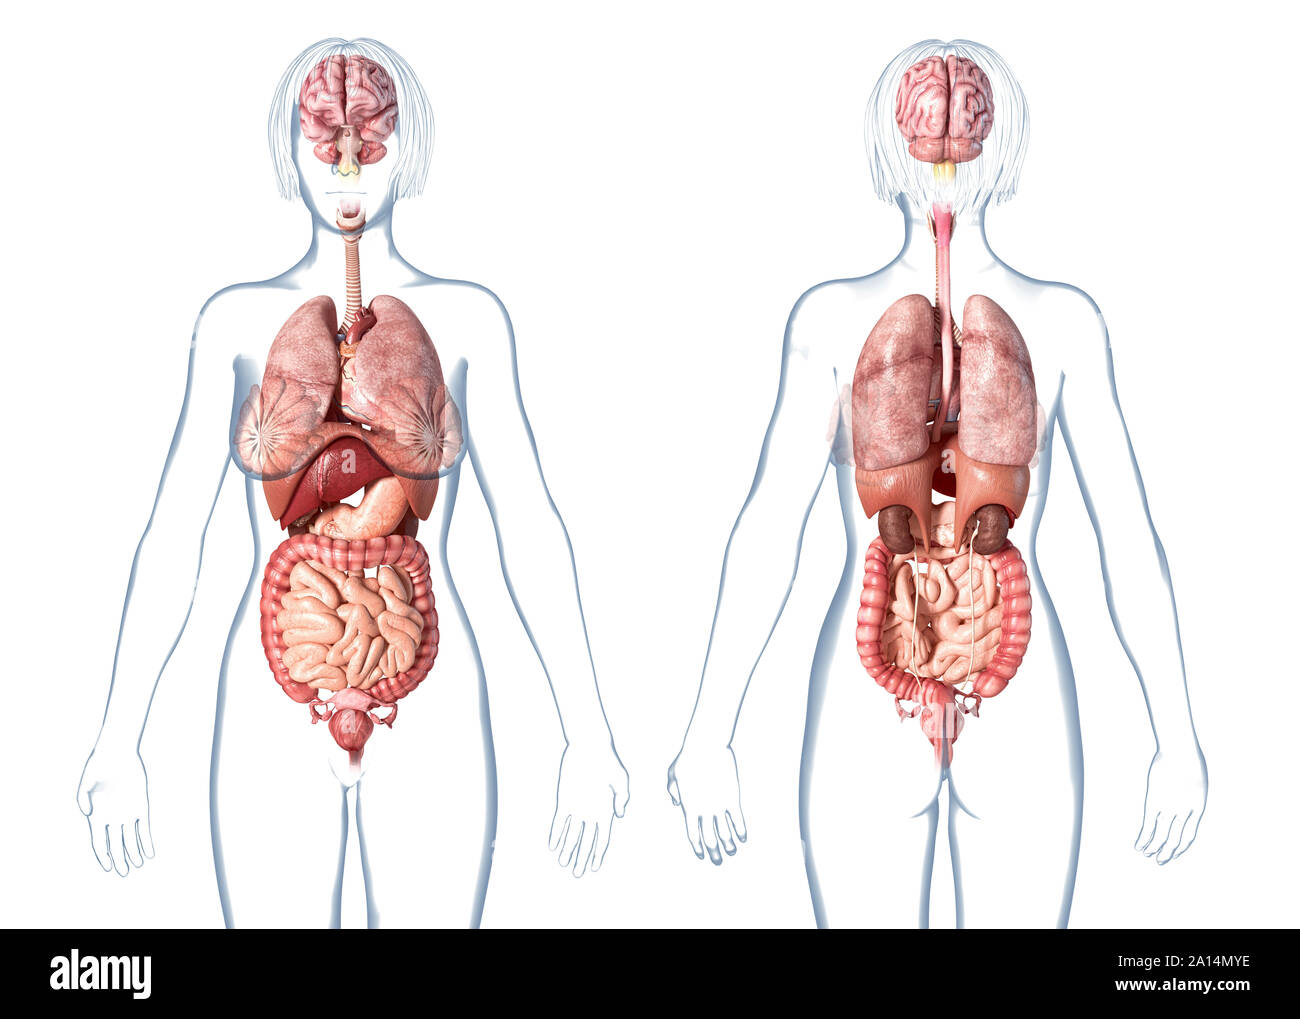 Female anatomy internal organs, rear and front views, on white background. Stock Photo